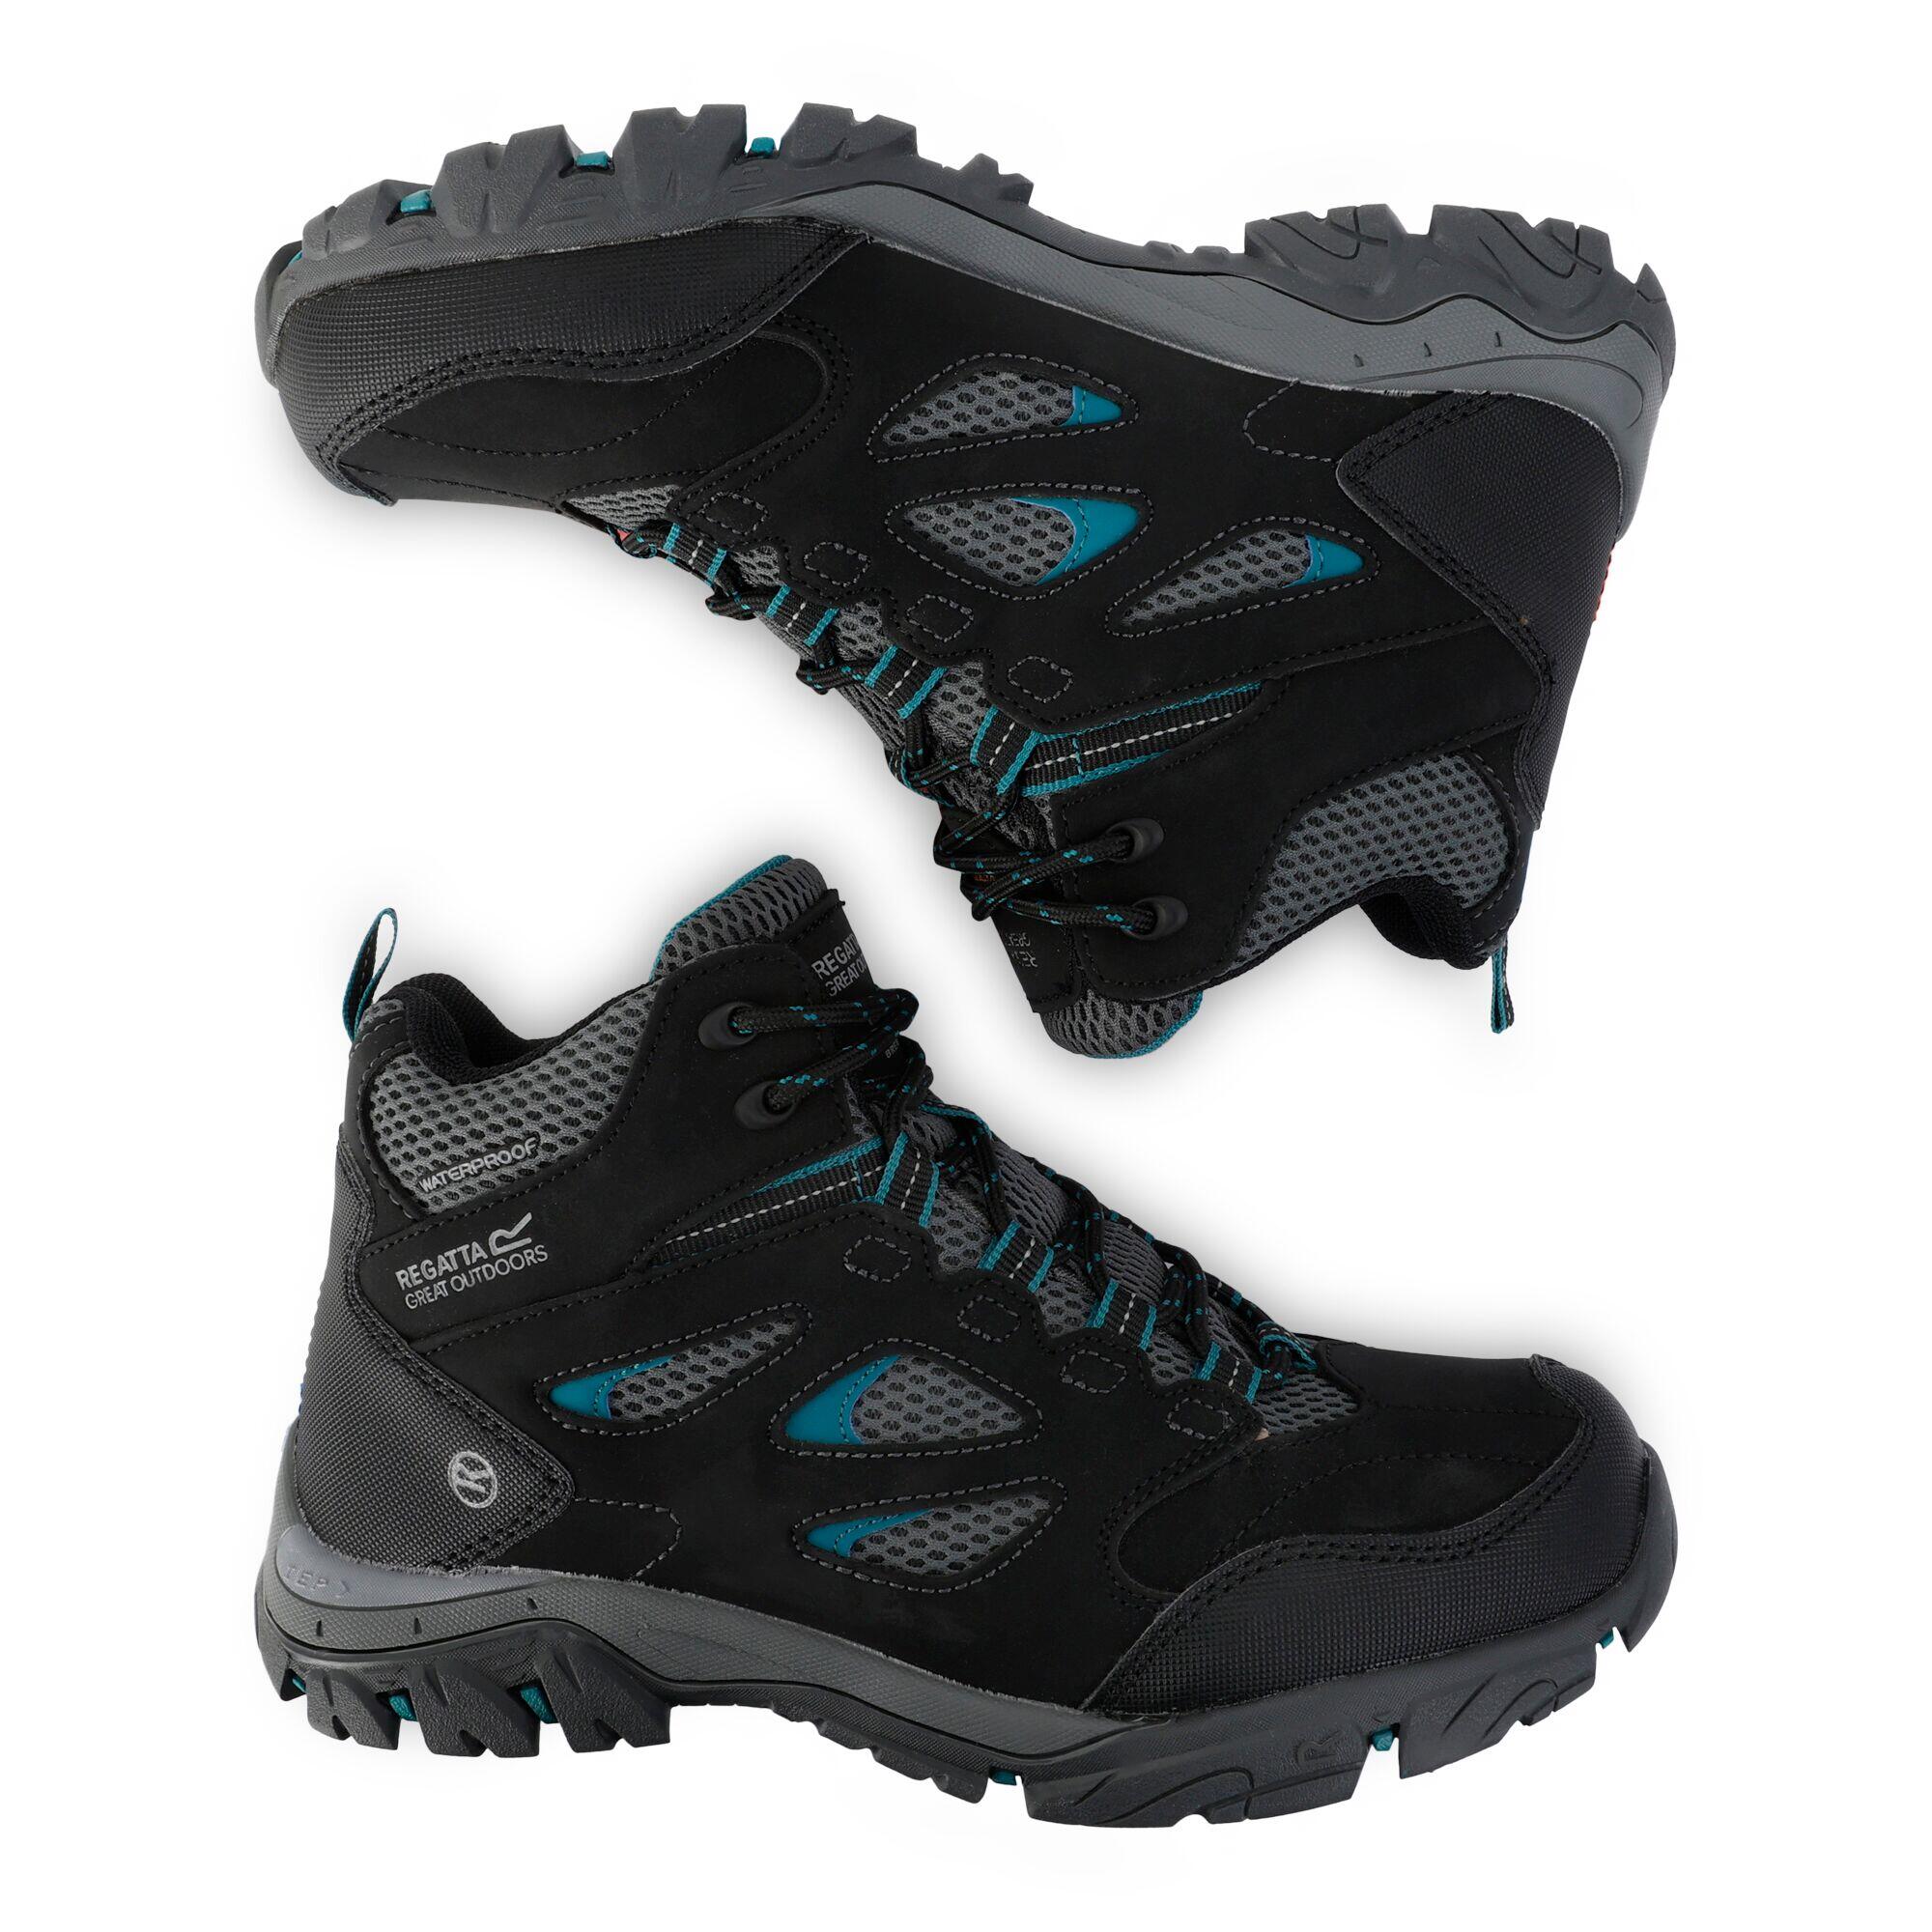 Lady Holcombe IEP Mid Women's Hiking Boots - Black / Blue 3/5